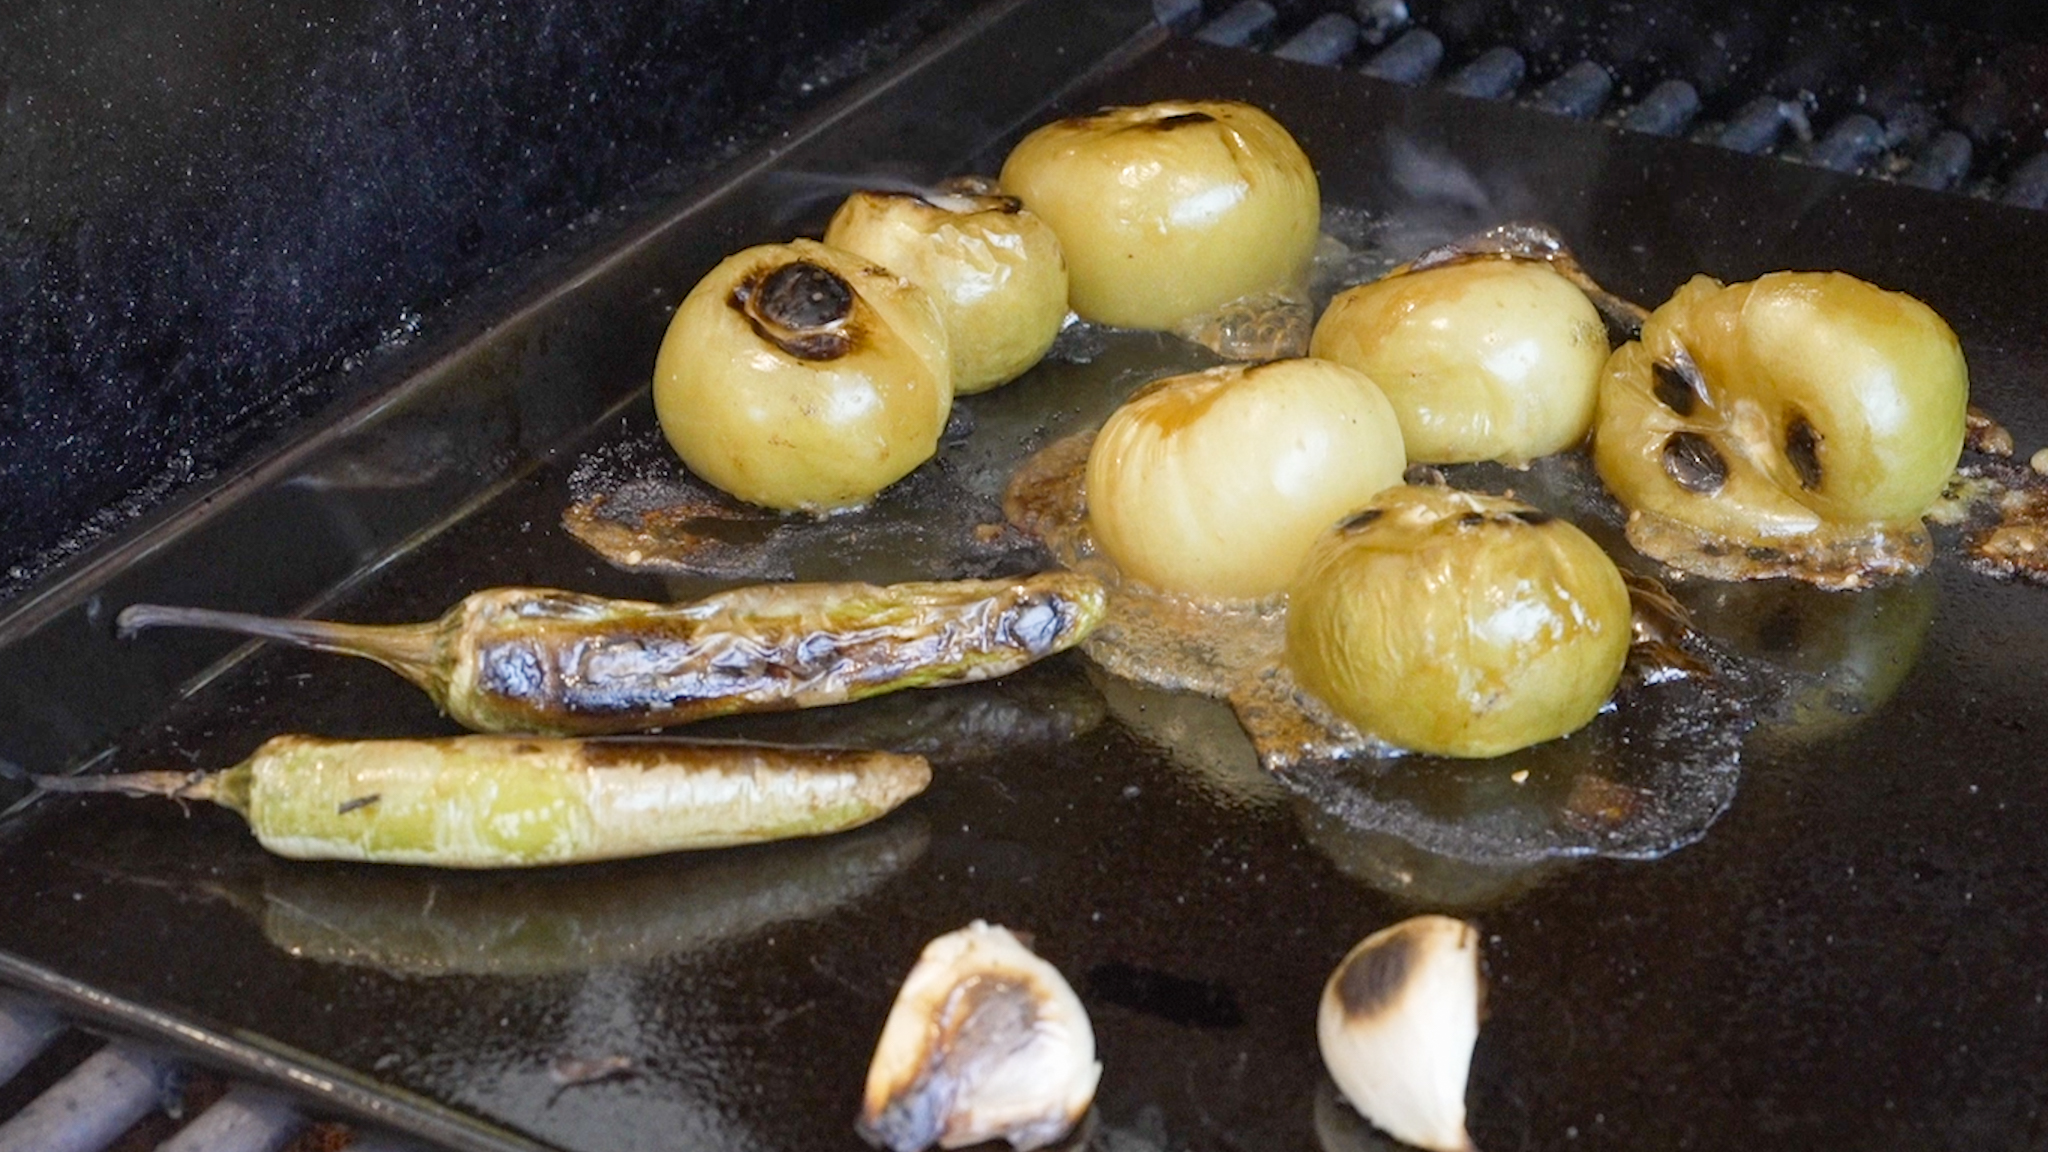 Roast the vegetables in a barbecue or under a broiler.